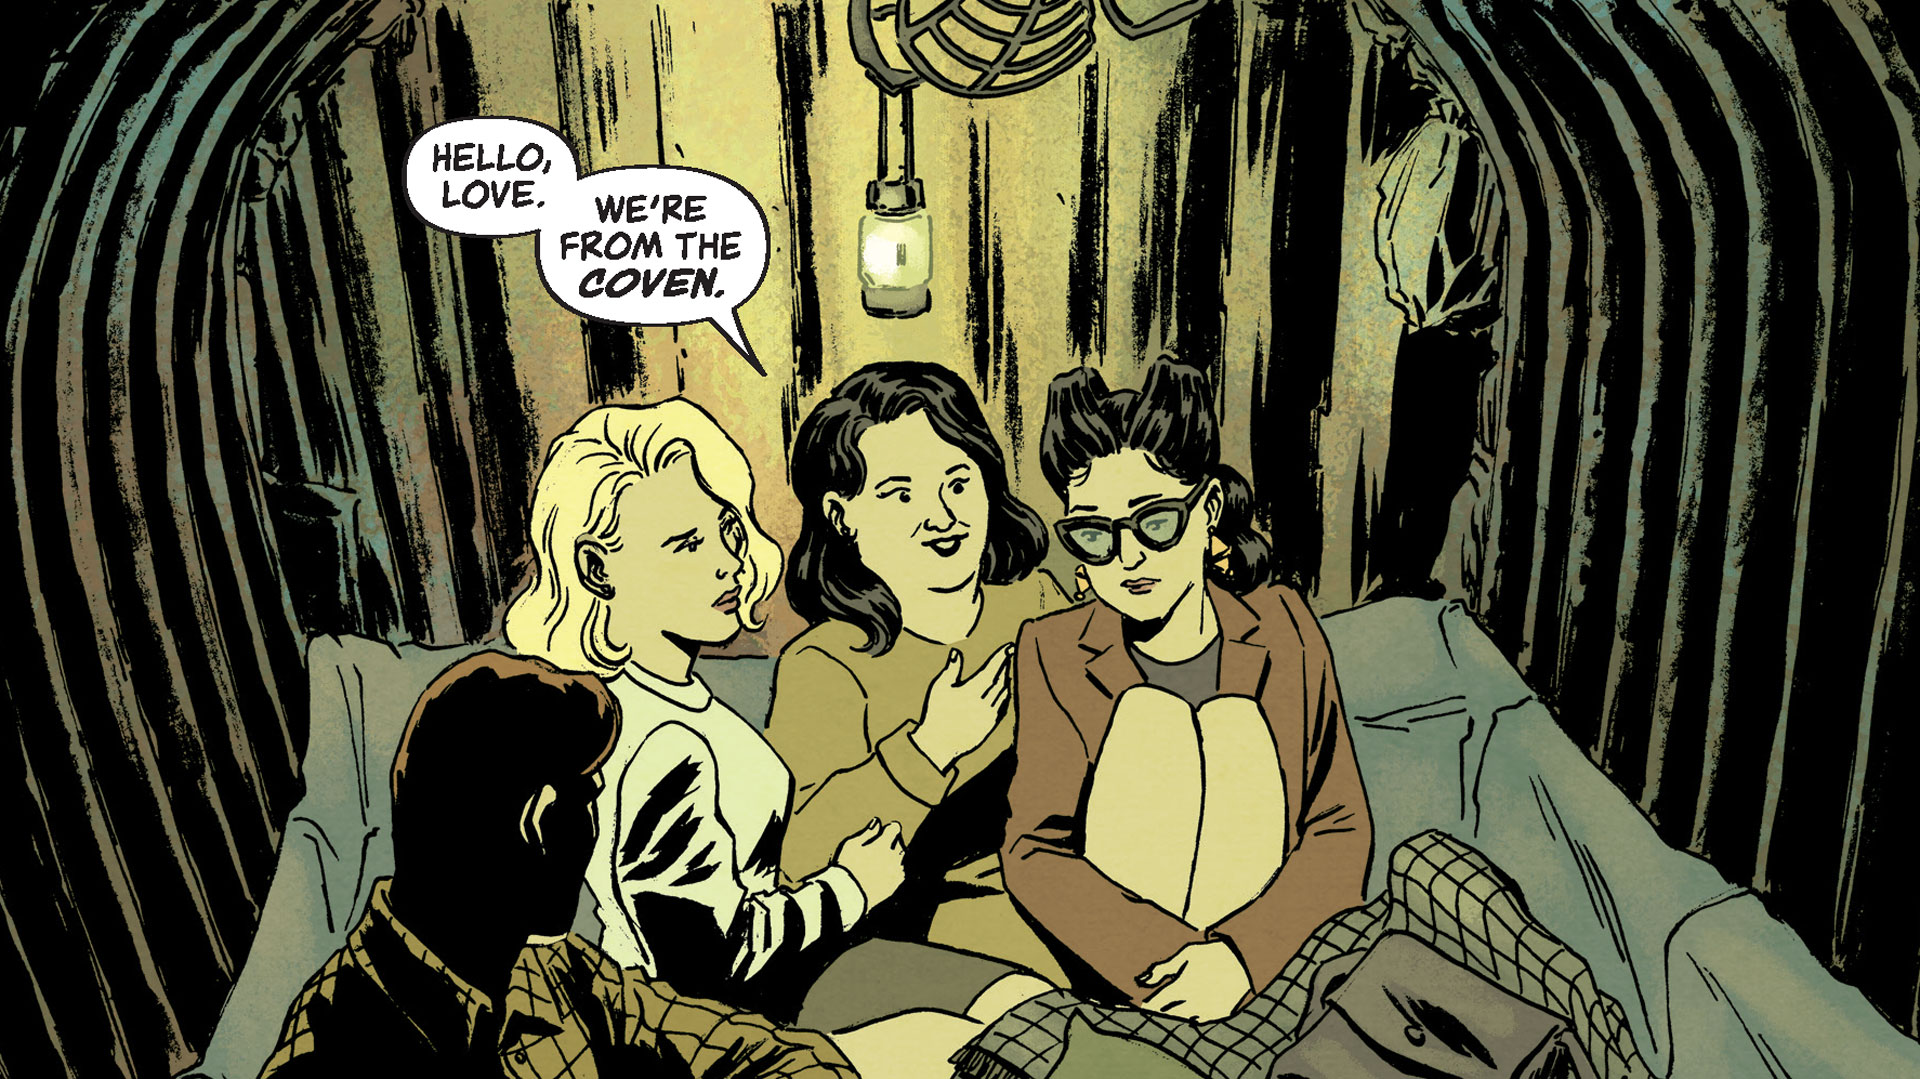 Witches of World War II: "Hello love, we're from the coven." Art by Valeria Burzo & Jordie Bellaire